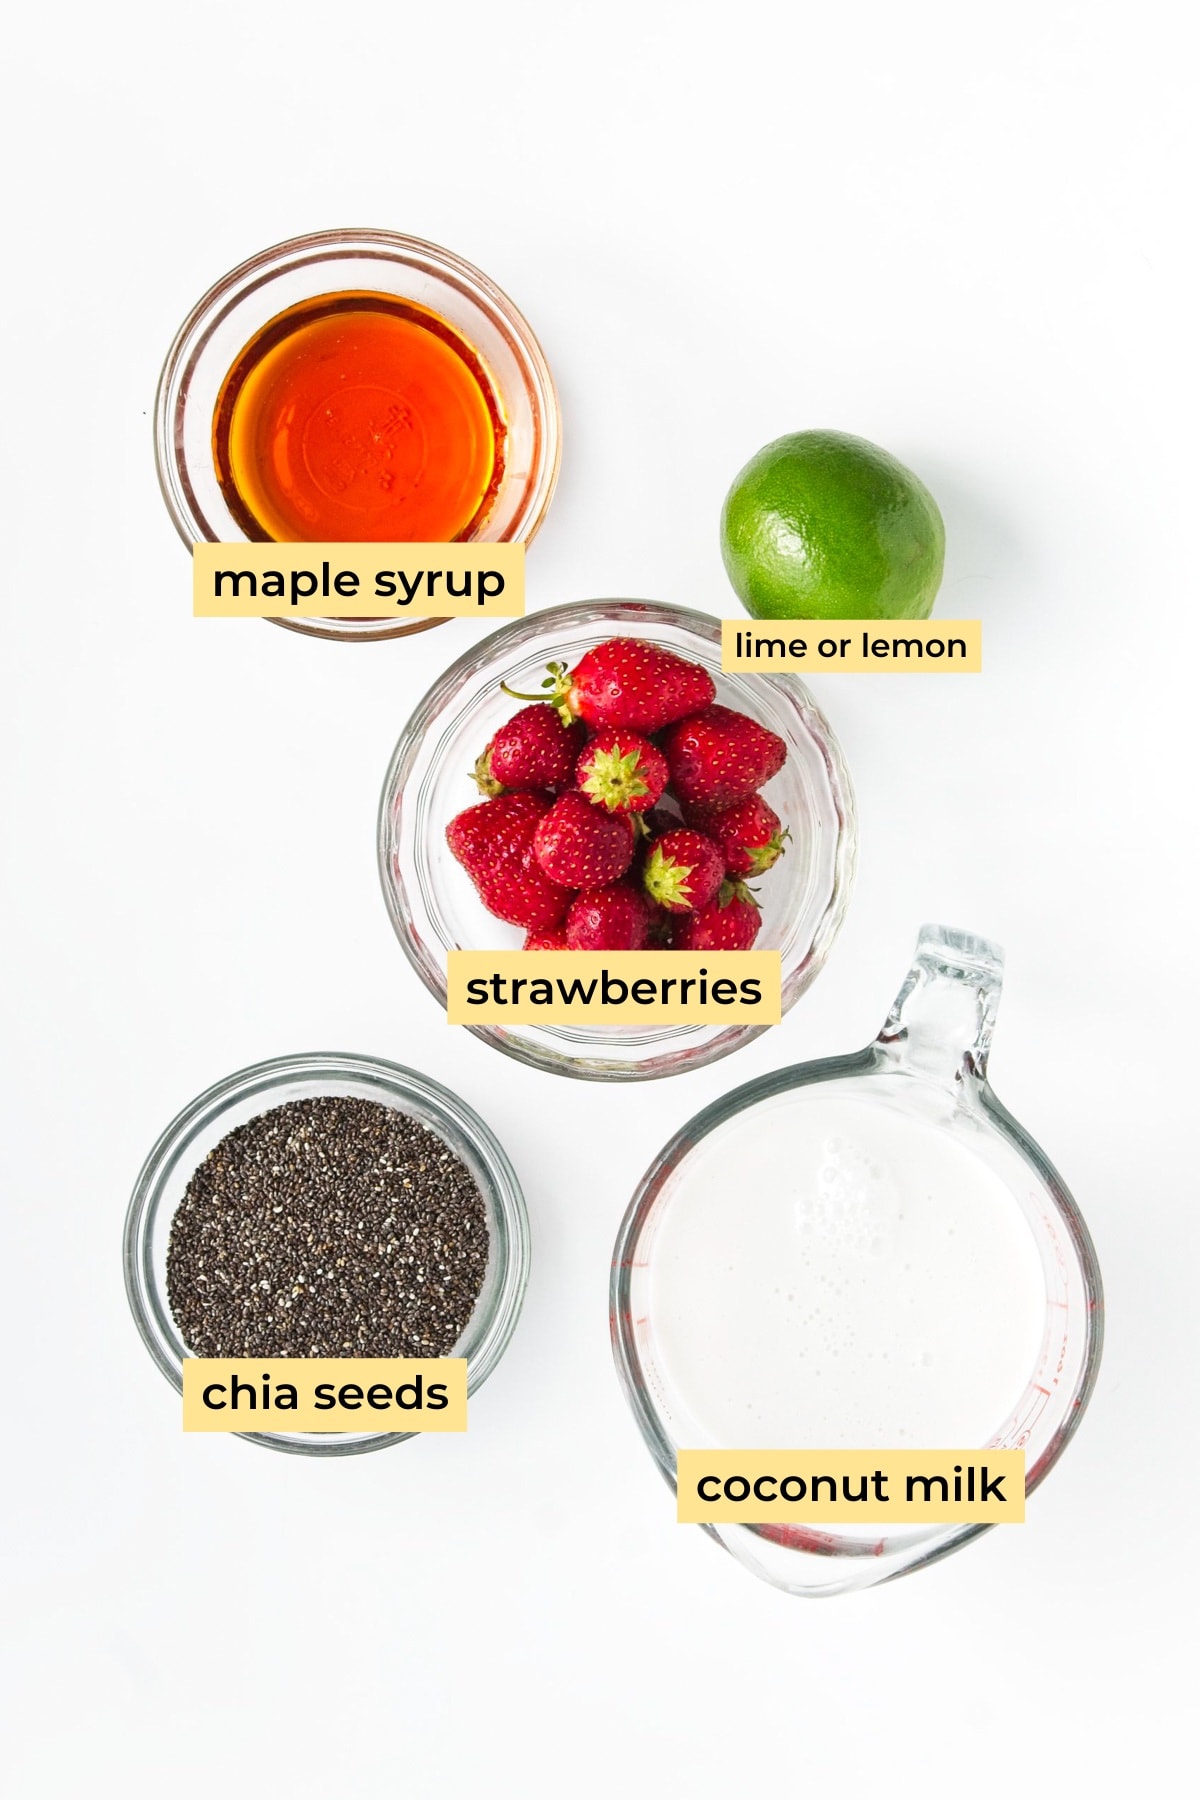 Ingredients in glass bowls: maple syrup, strawberries, lime, chia seeds and coconut milk.